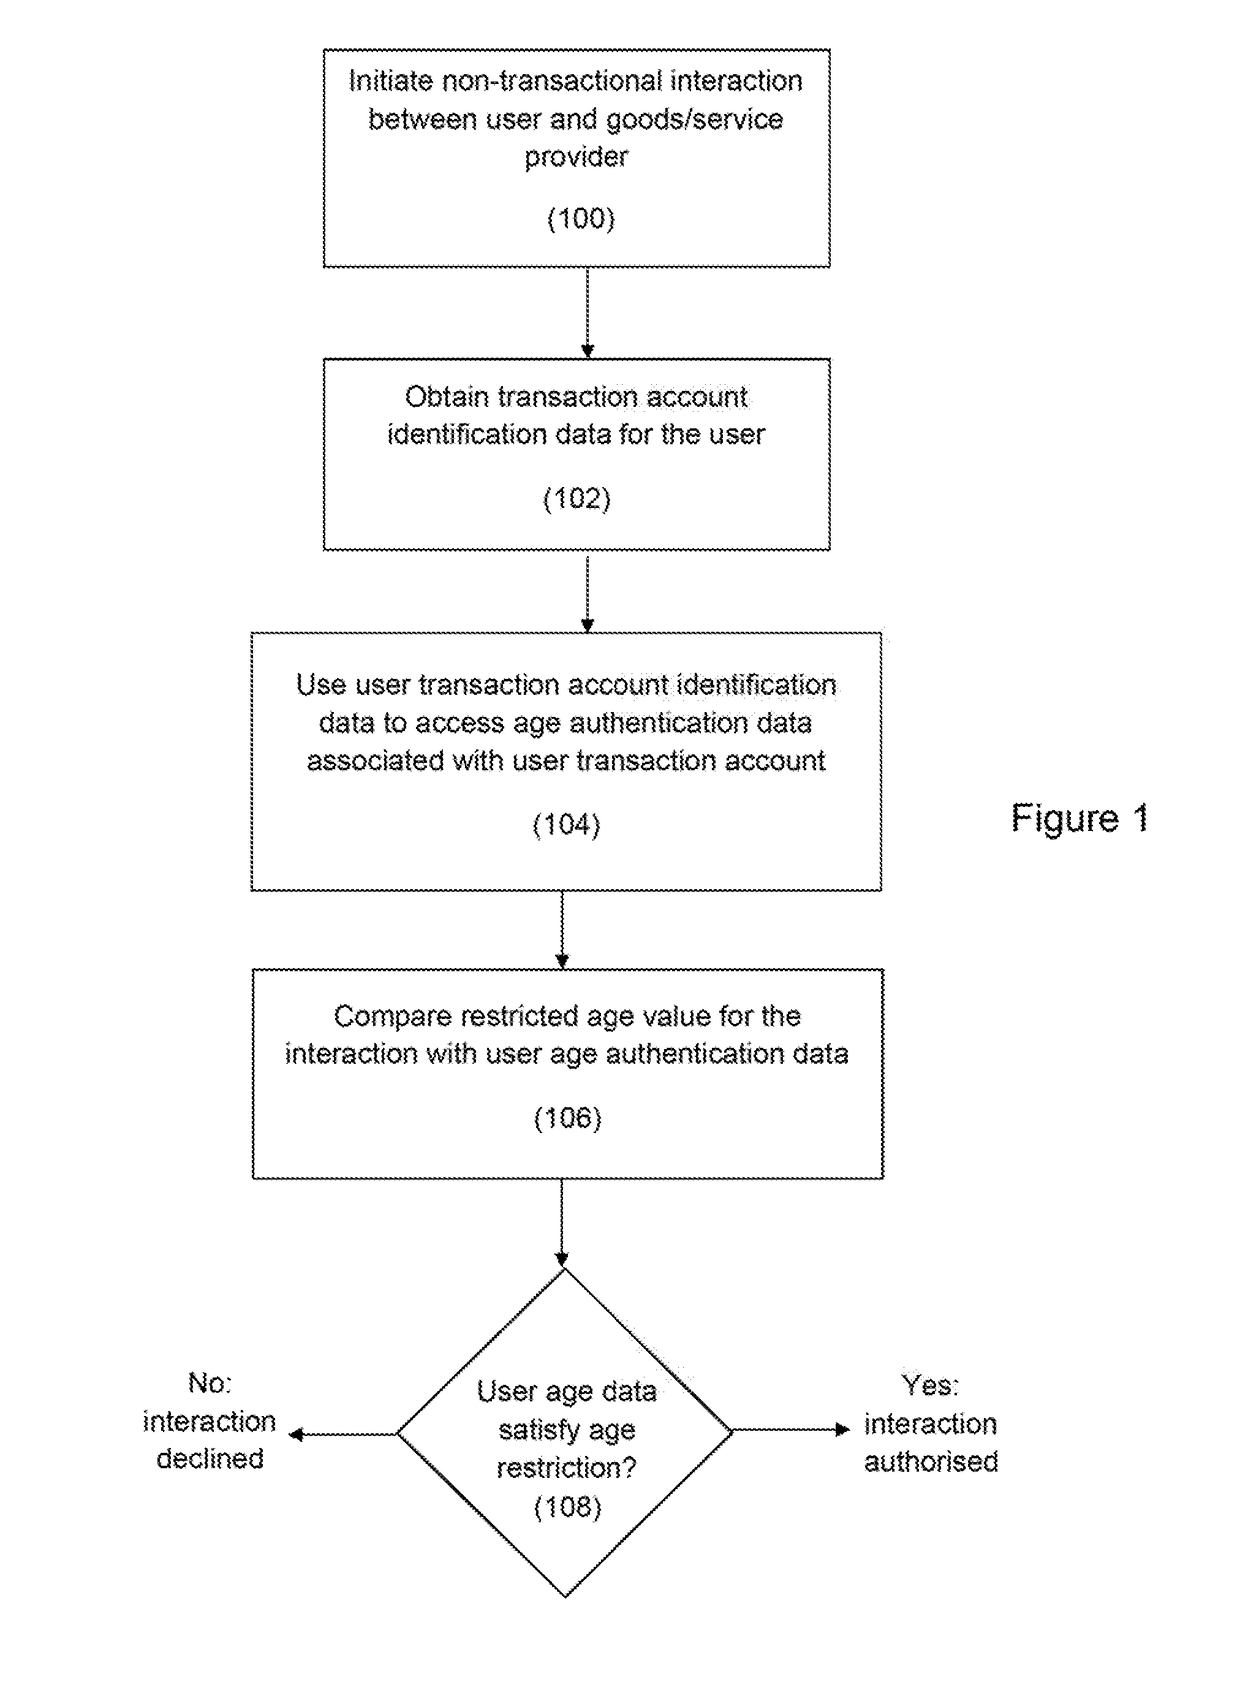 Methods, devices and systems for authorizing an age-restricted interaction